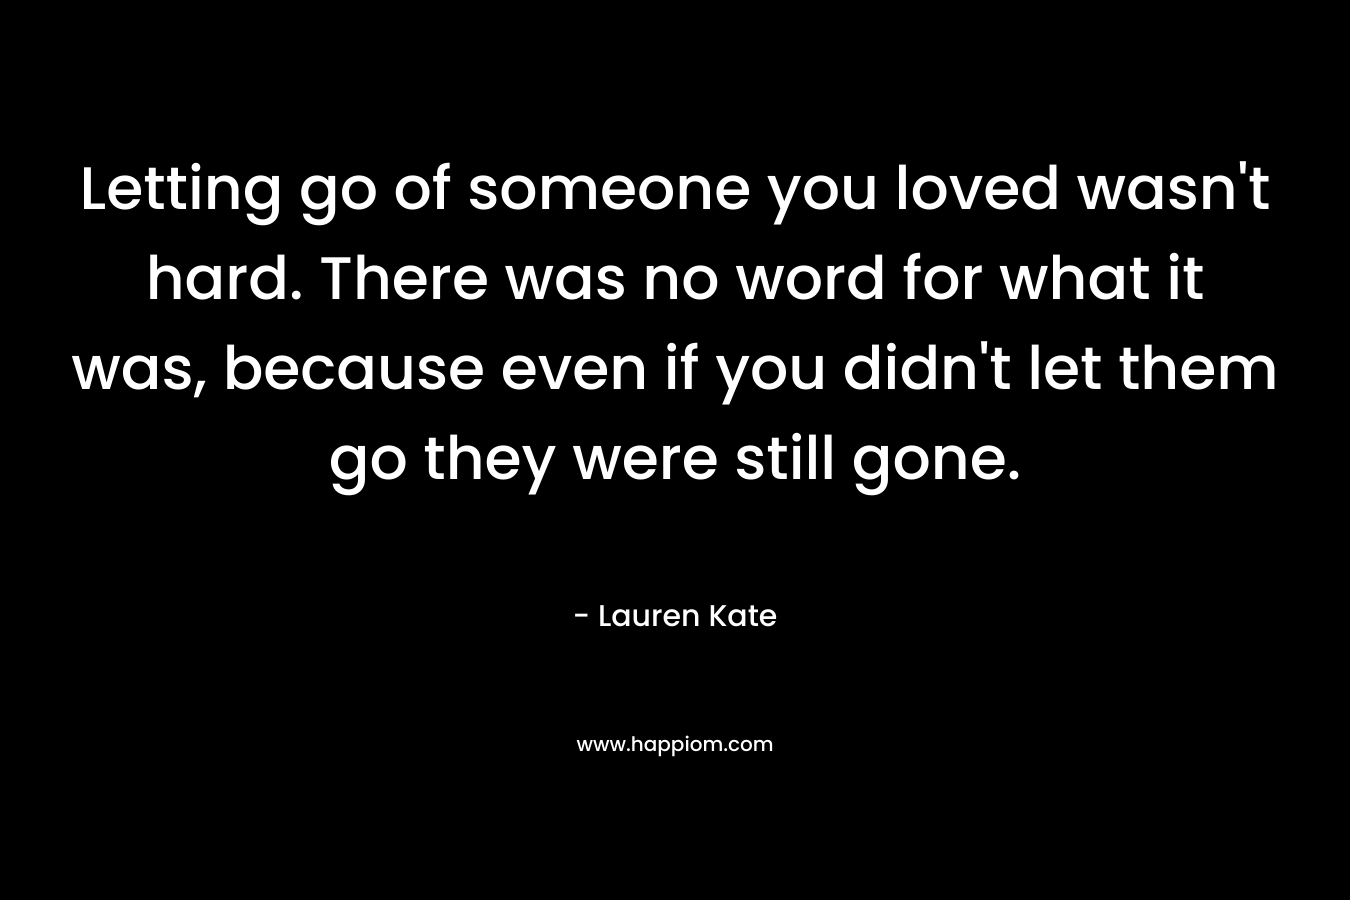 Letting go of someone you loved wasn’t hard. There was no word for what it was, because even if you didn’t let them go they were still gone. – Lauren Kate